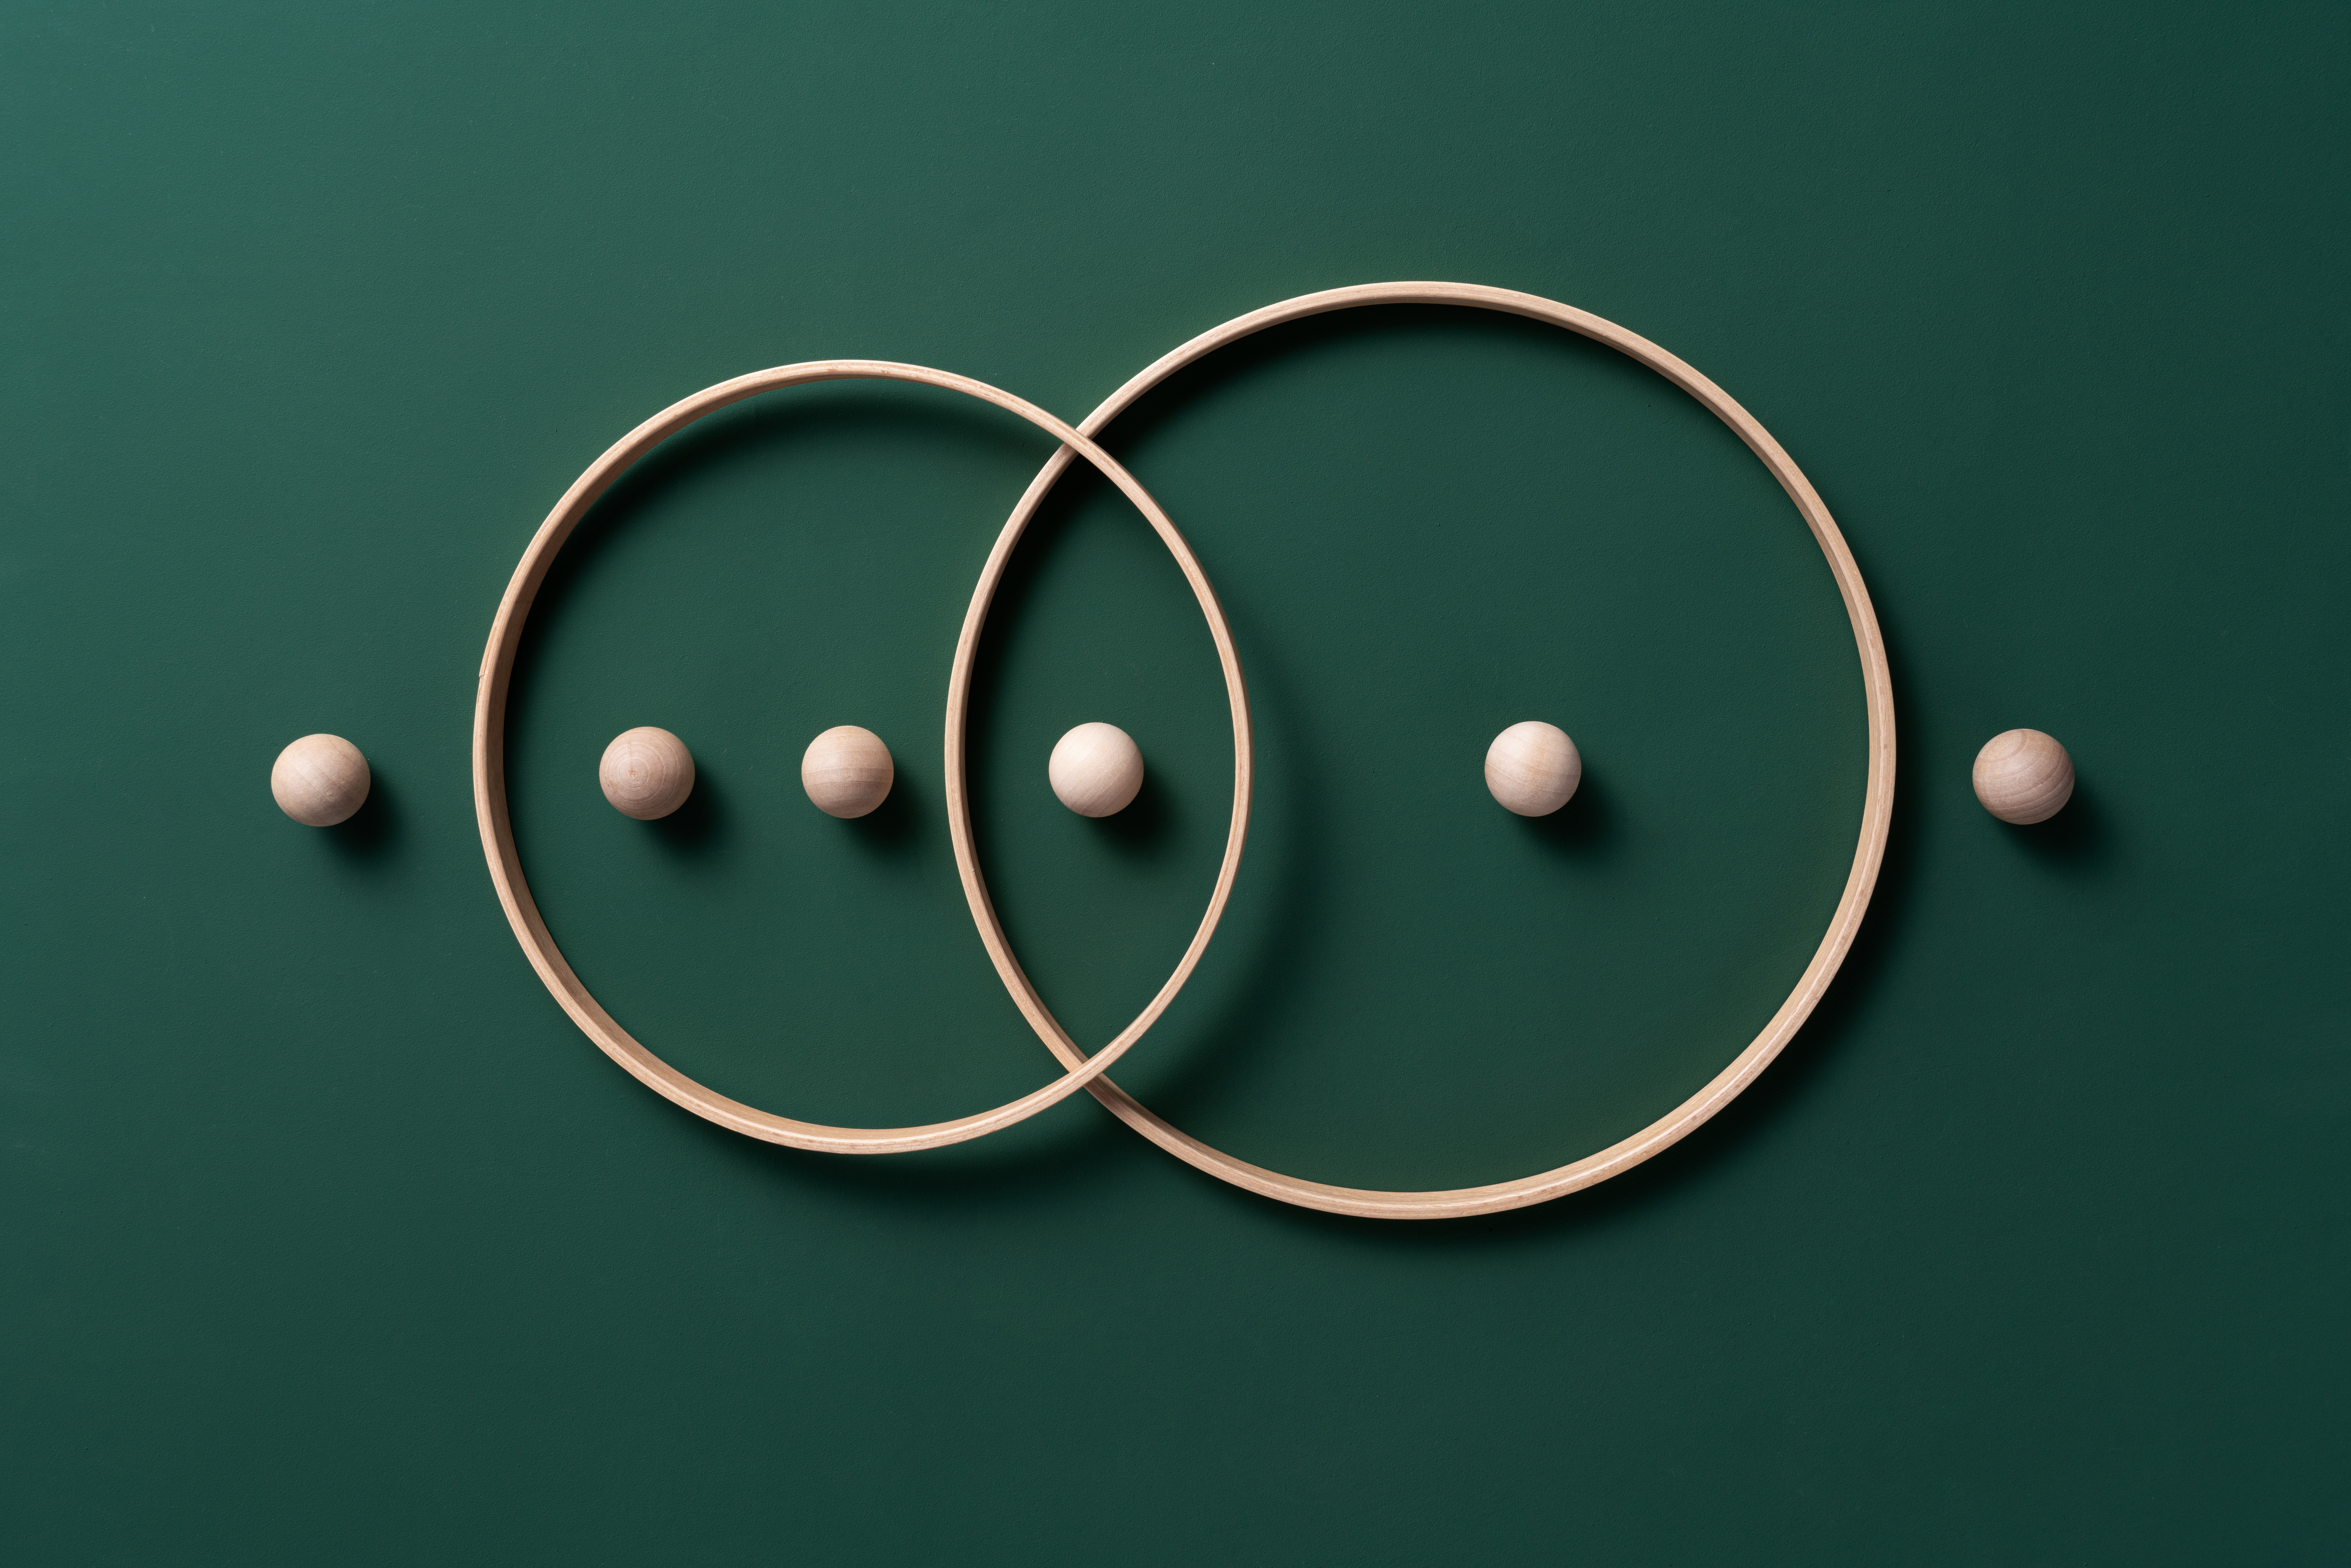 Image of intersecting rings with spheres on a green background.